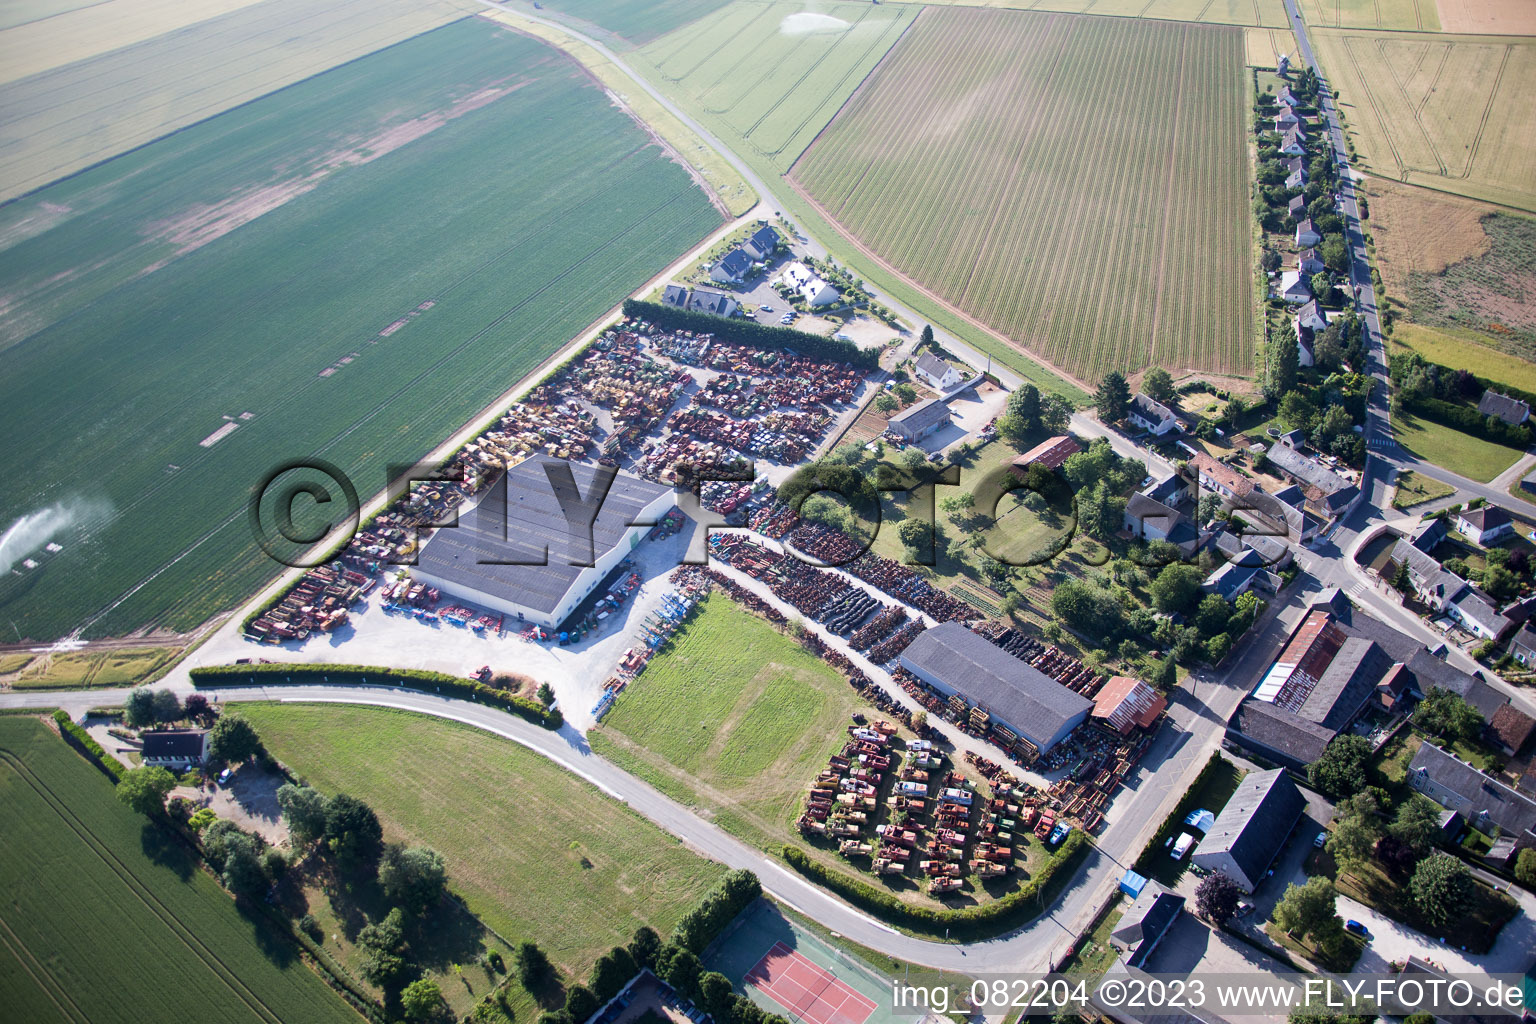 Talcy in the state Loir et Cher, France seen from above